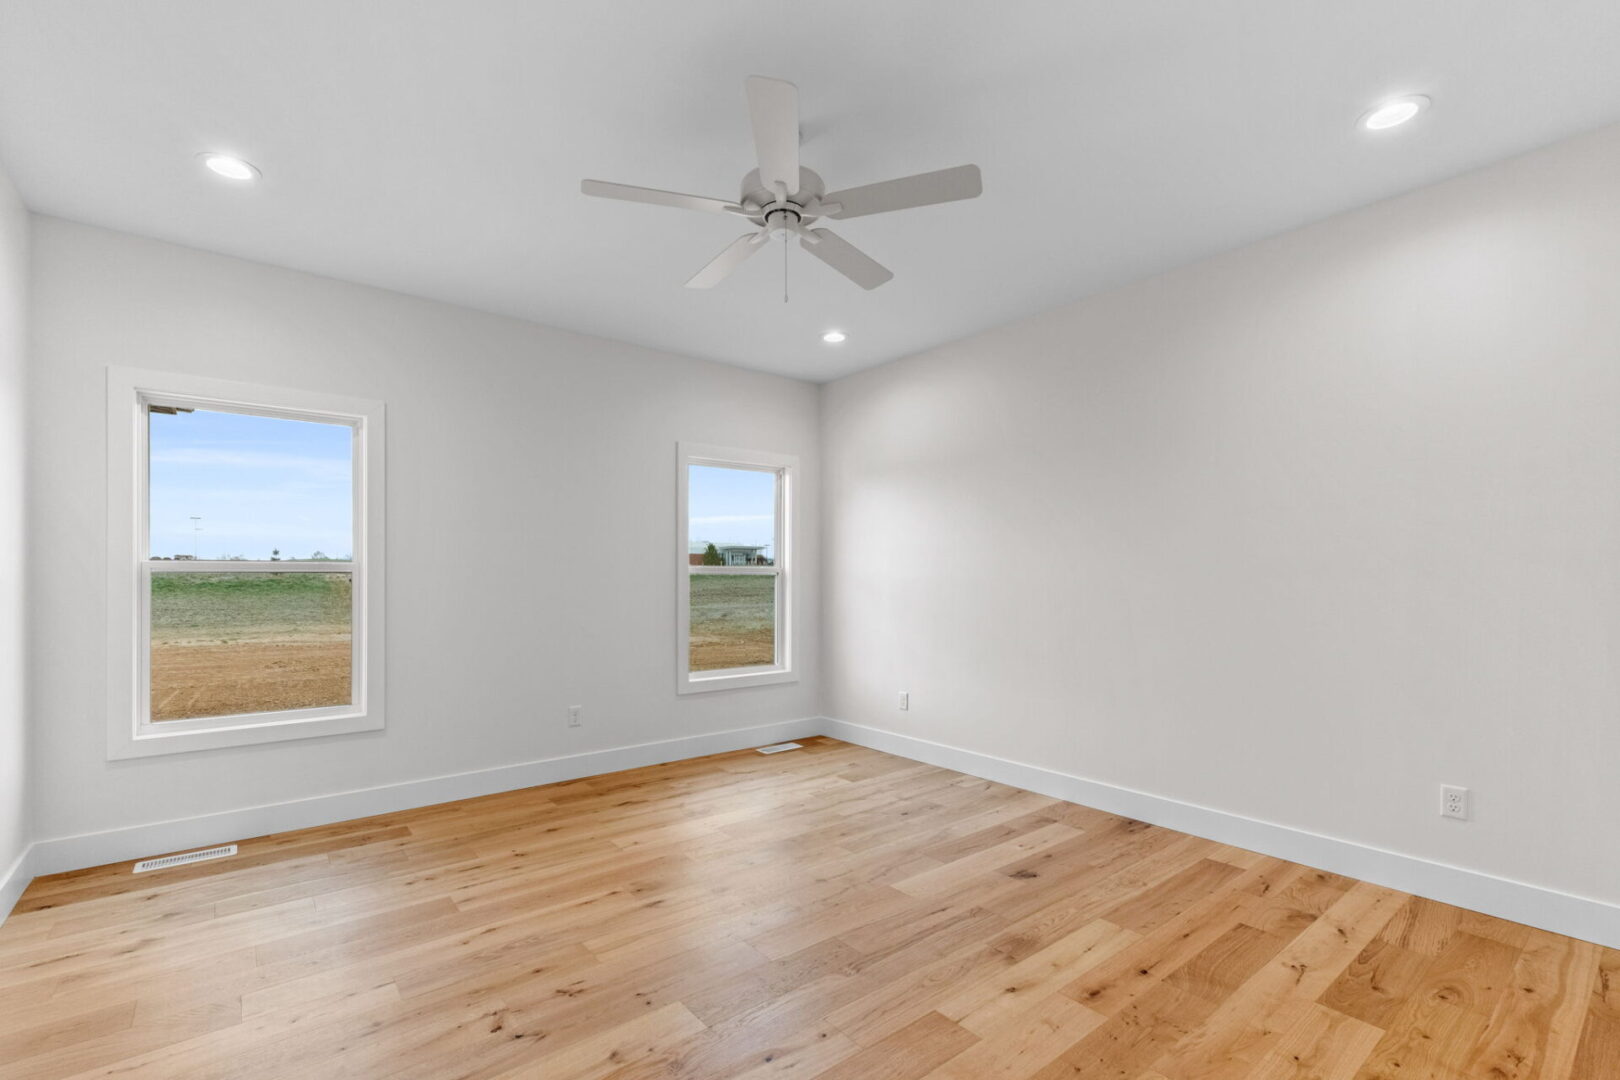 An empty room with a fan and two windows